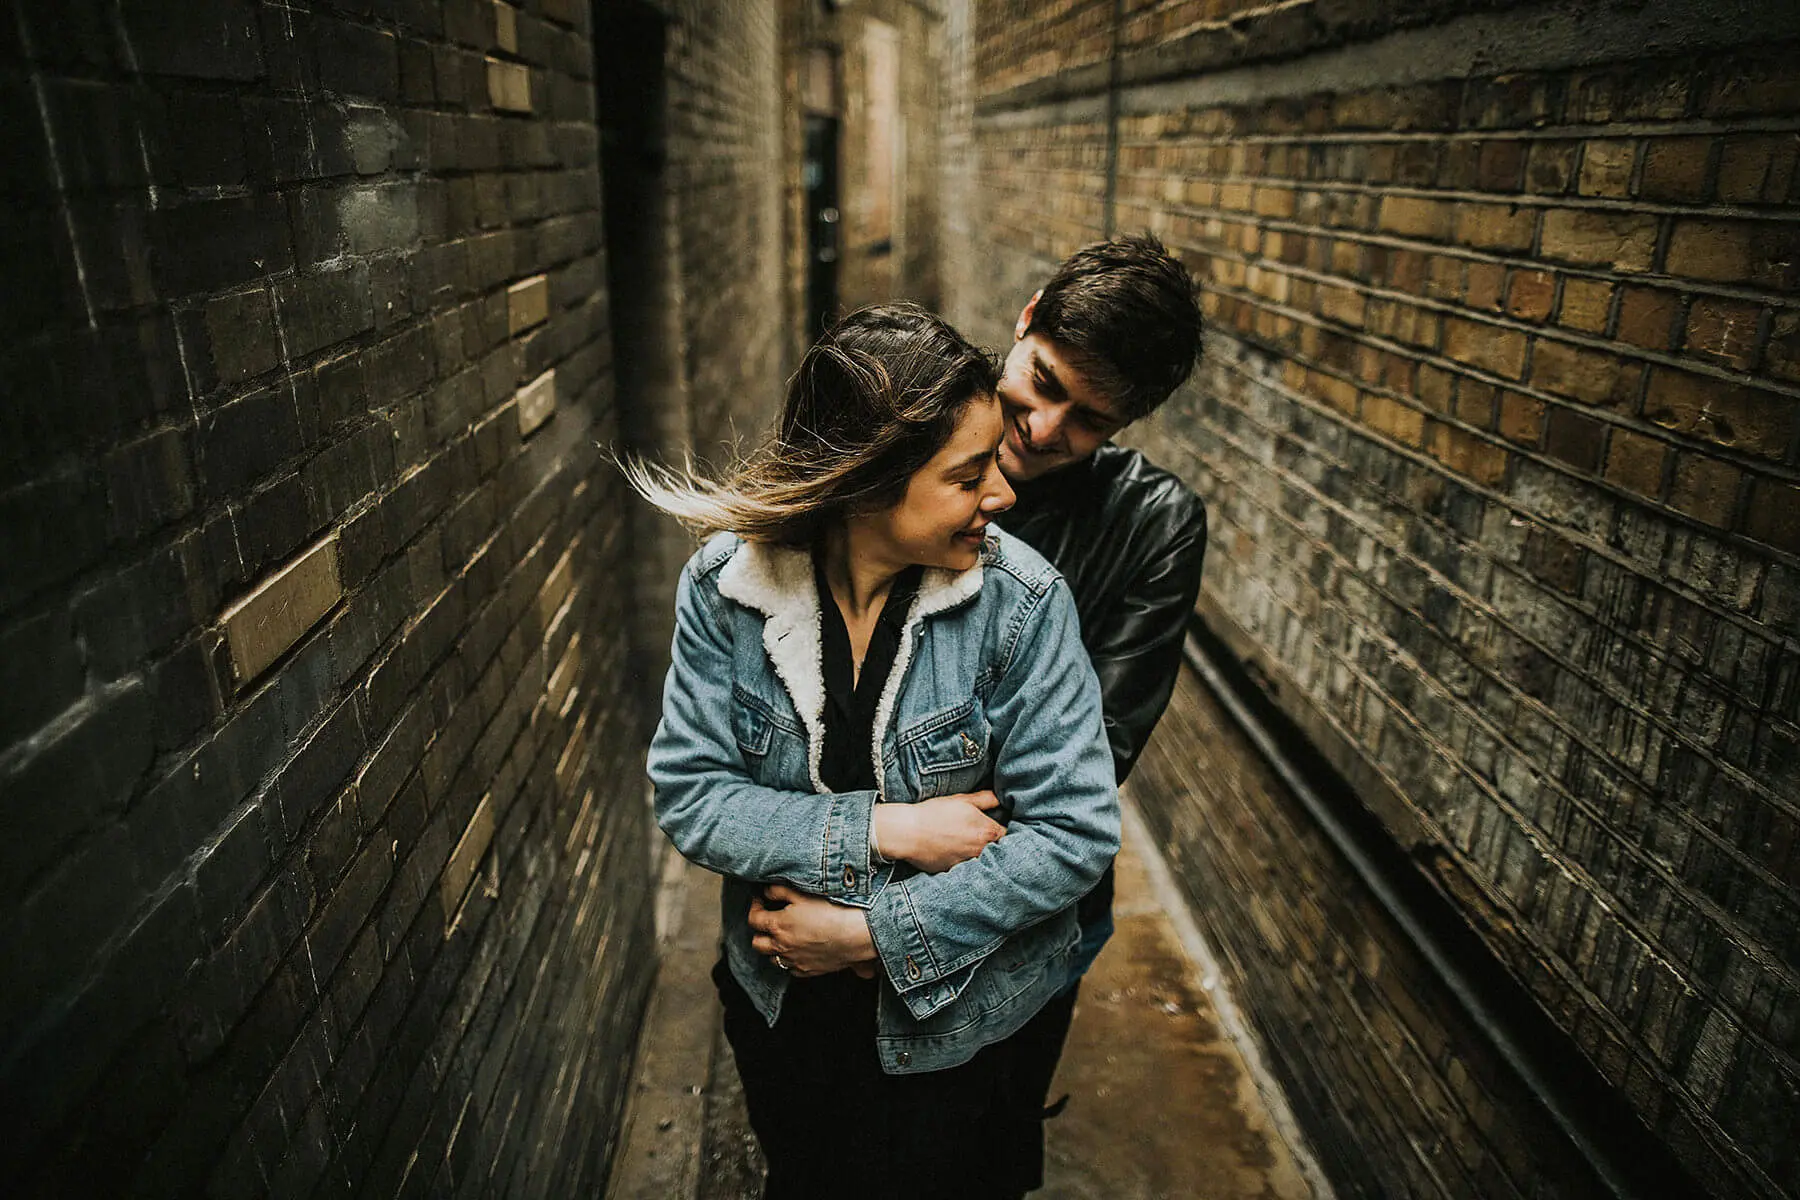 A smiling couple is embraced in a narrow alley with brick walls. The woman, wearing a denim jacket with a fur collar, looks content as the wind gently blows her hair. The man, in a black leather jacket, hugs her from behind, resting his chin on her shoulder with a joyful expression. The warmth between them contrasts with the urban, gritty setting.